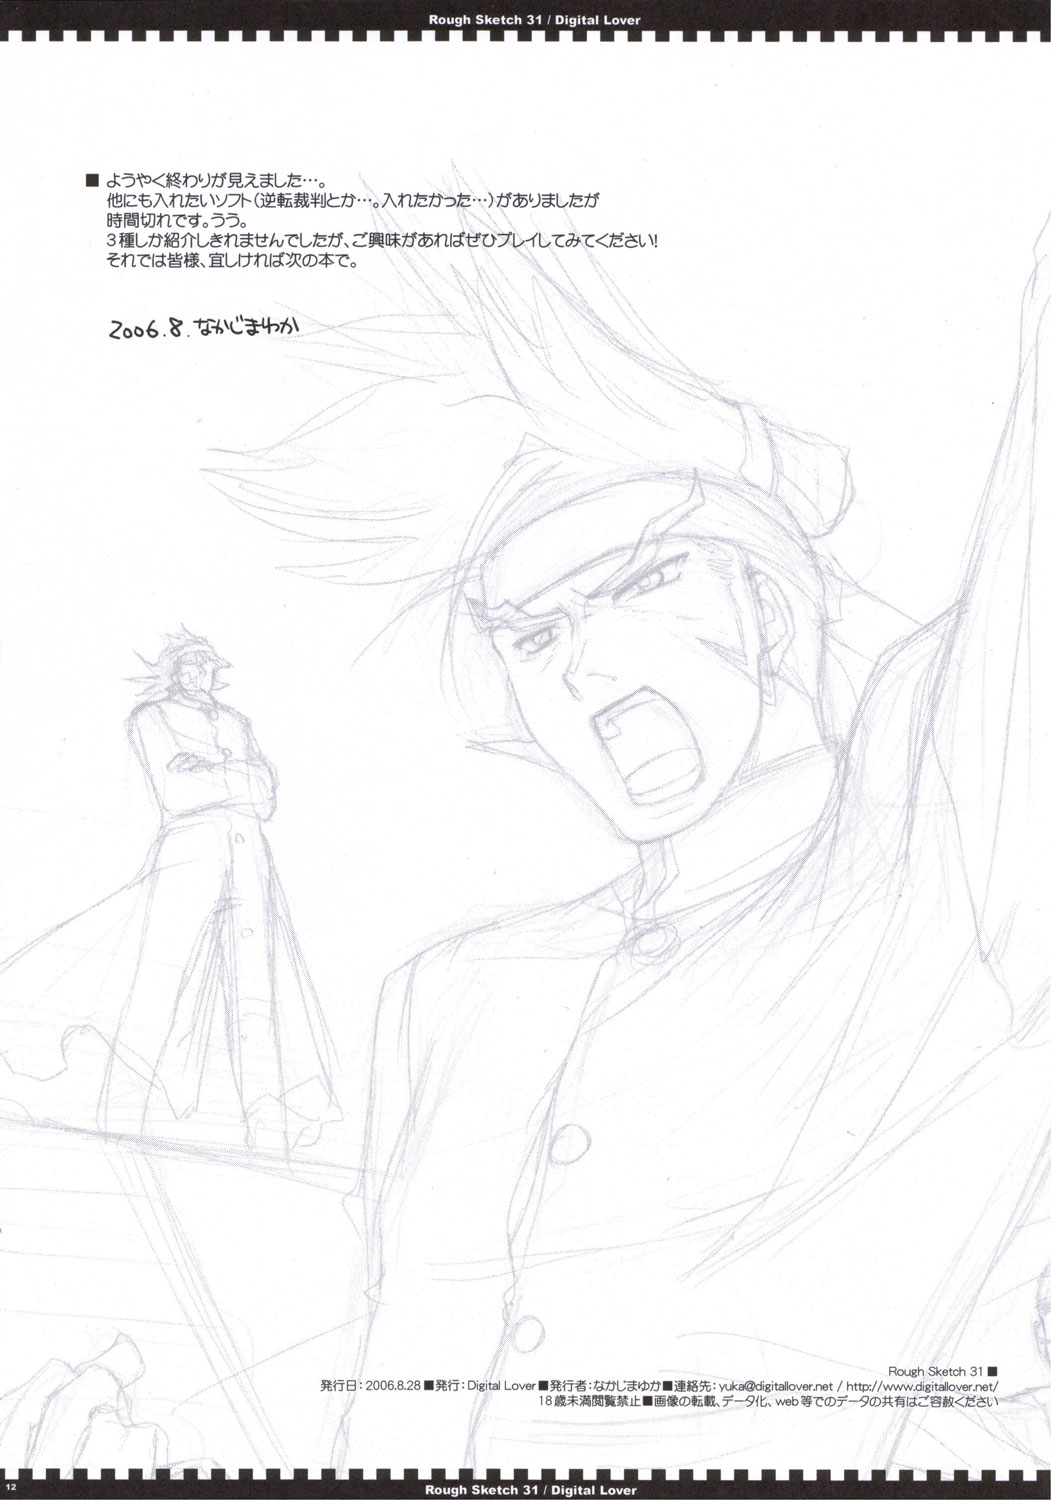 [Digital lover] Rough Sketch 31 page 12 full